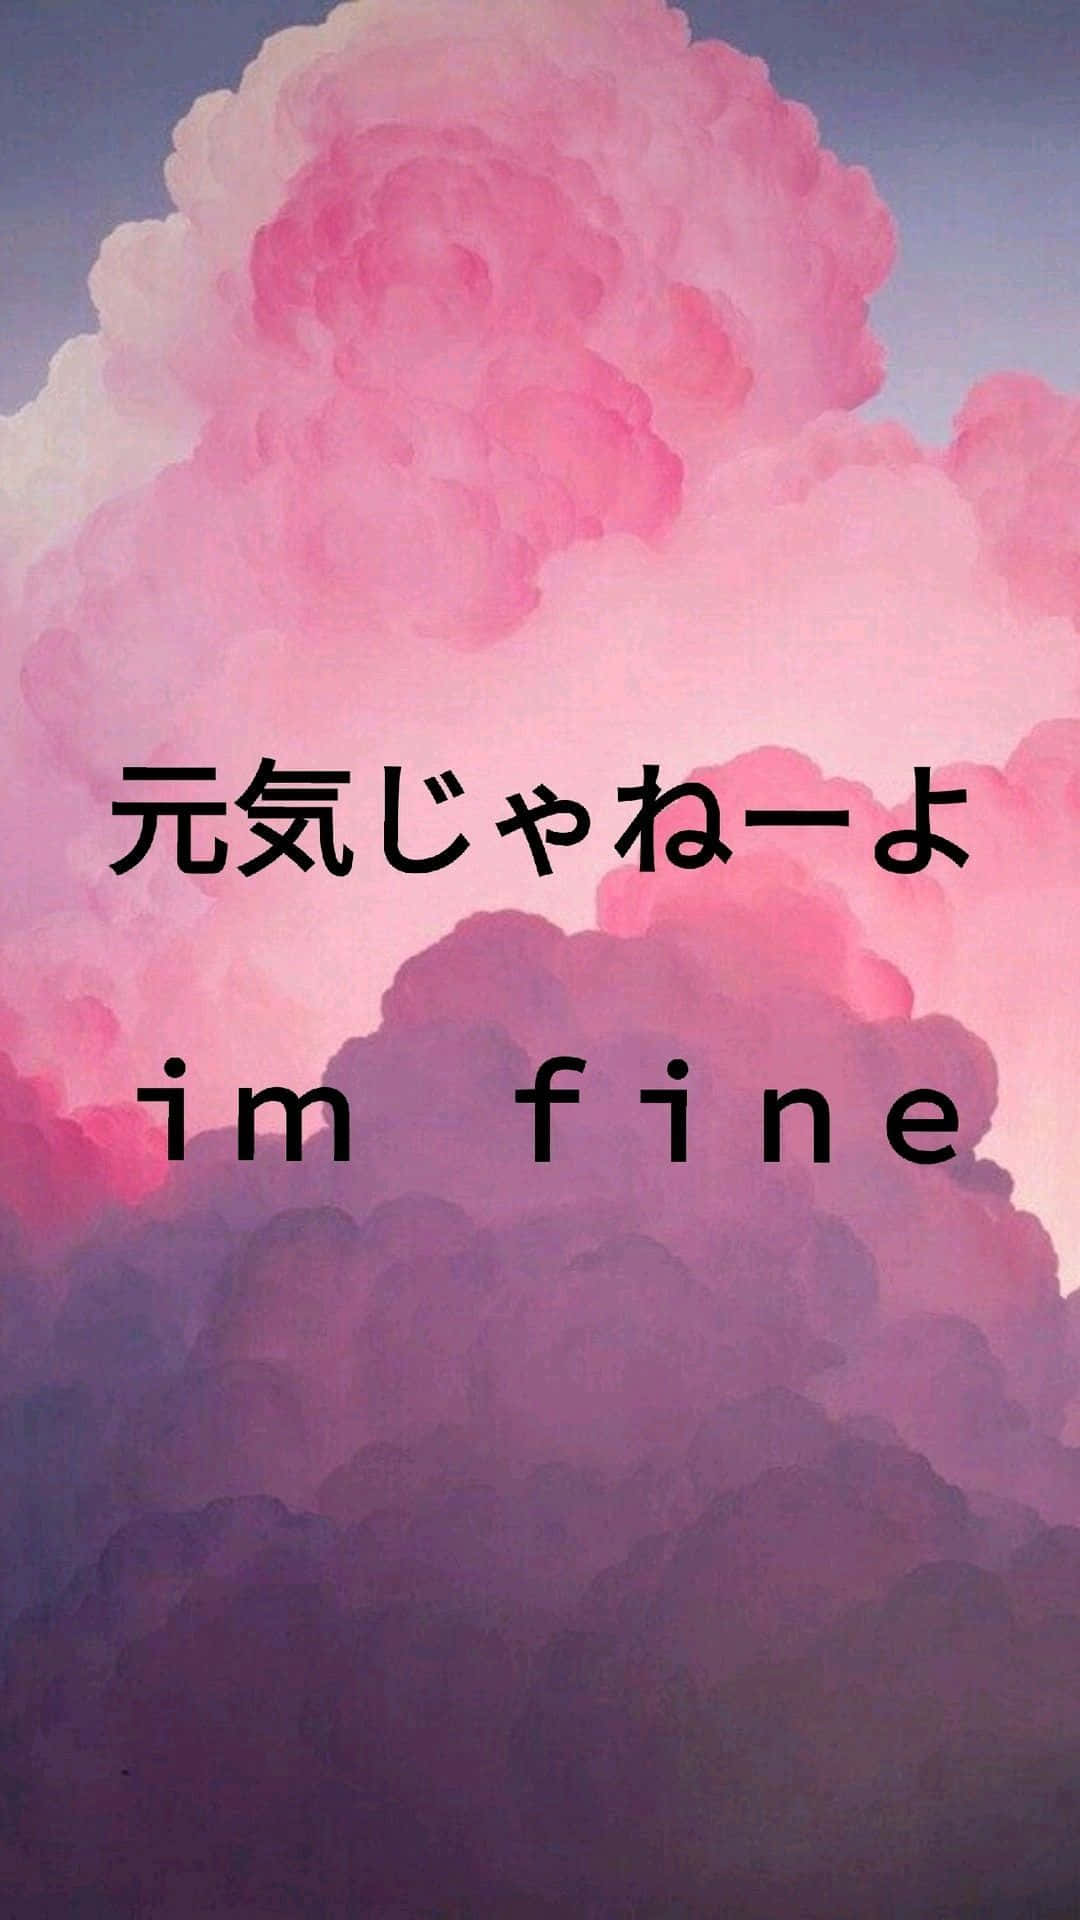 Pink Cloud Pastel Aesthetic Anime Quote Wallpaper